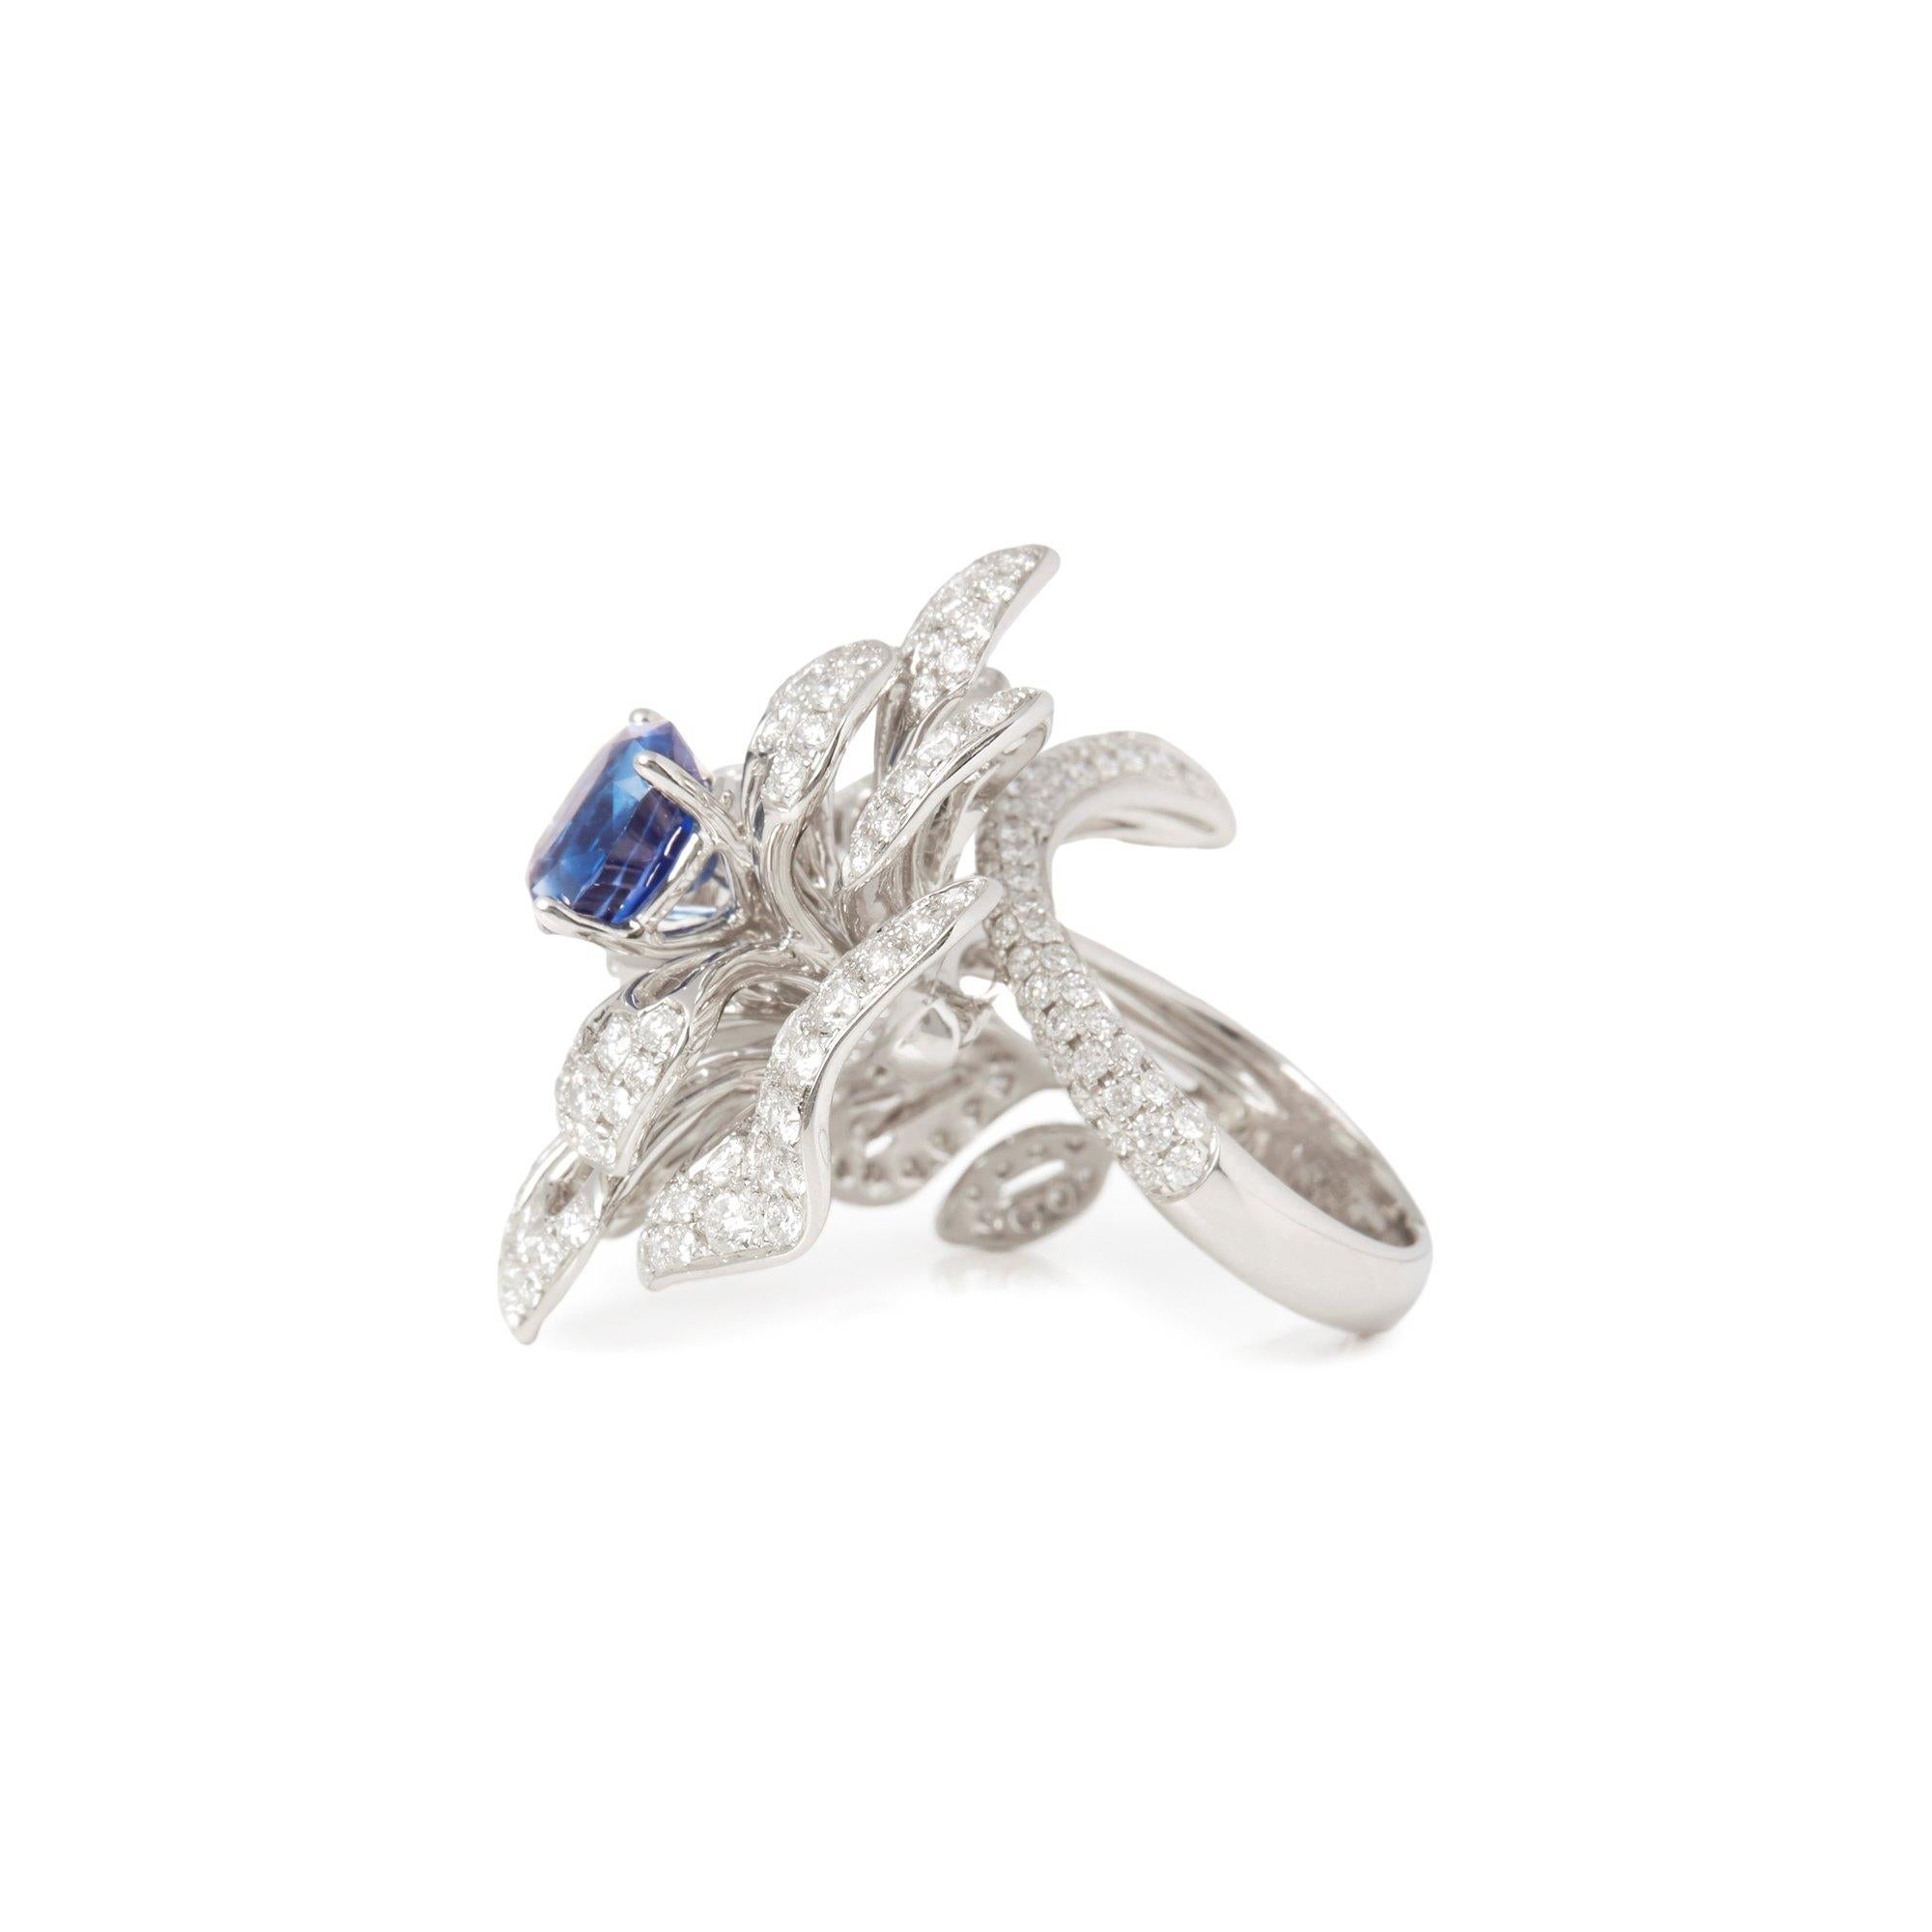 Certified 2.84ct Oval Cut Sapphire and Diamond 18ct Gold Ring In New Condition For Sale In Bishop's Stortford, Hertfordshire